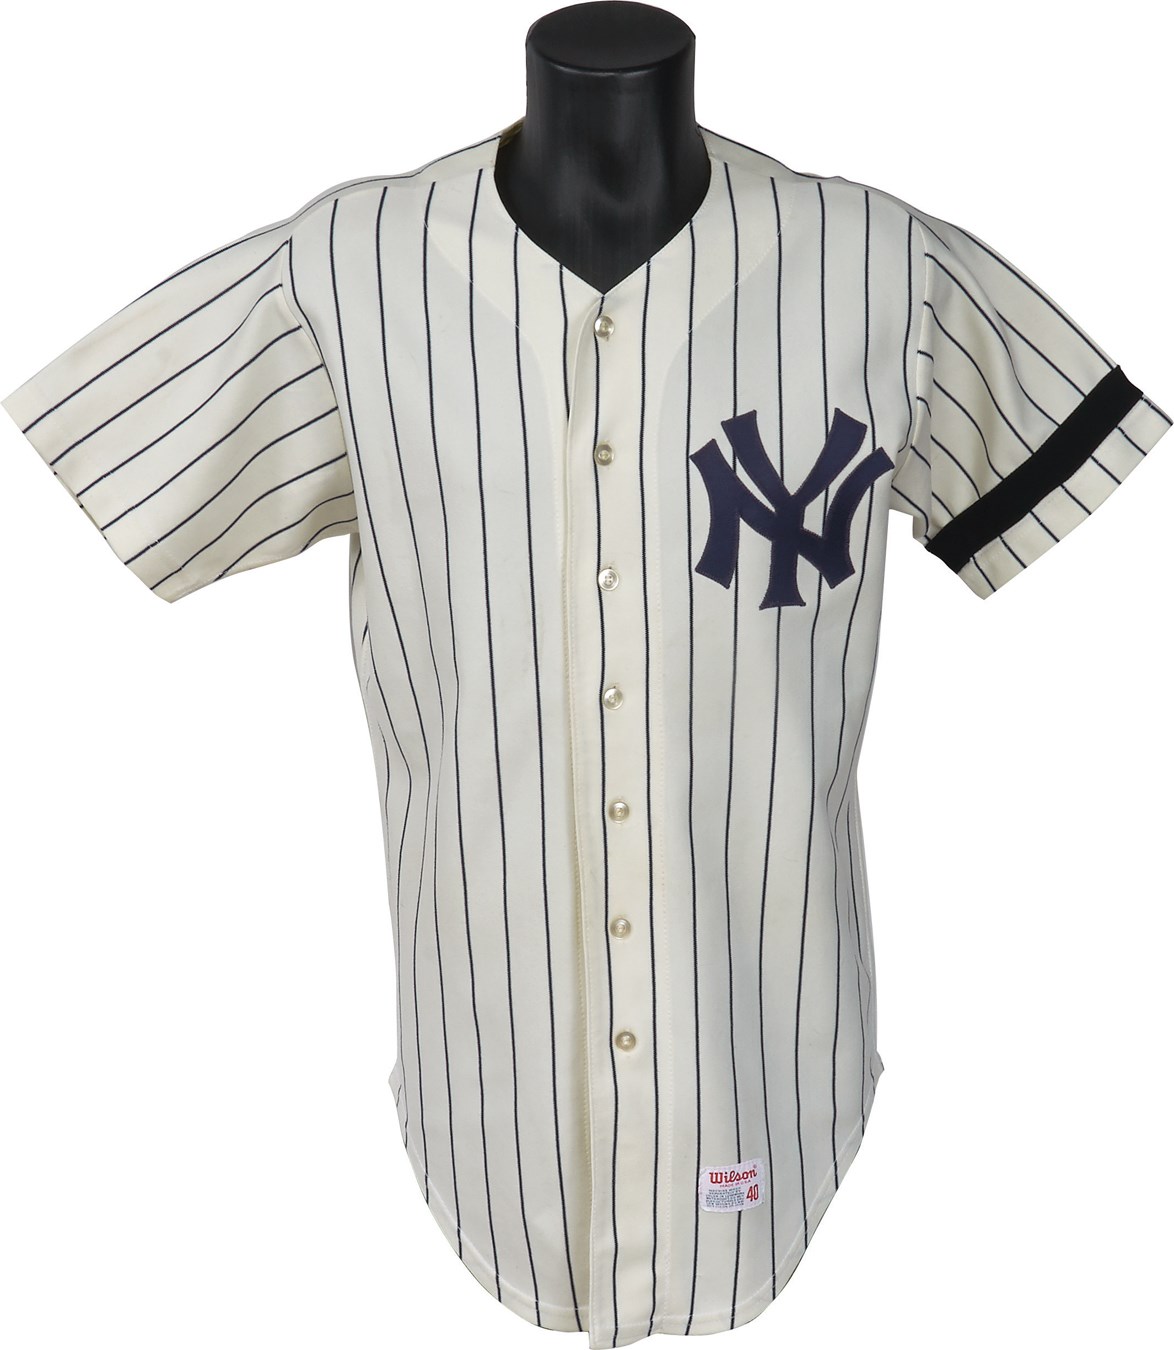 1978 Willie Randolph Game Worn World Series Game 2 Yankees Jersey (Photomatched)